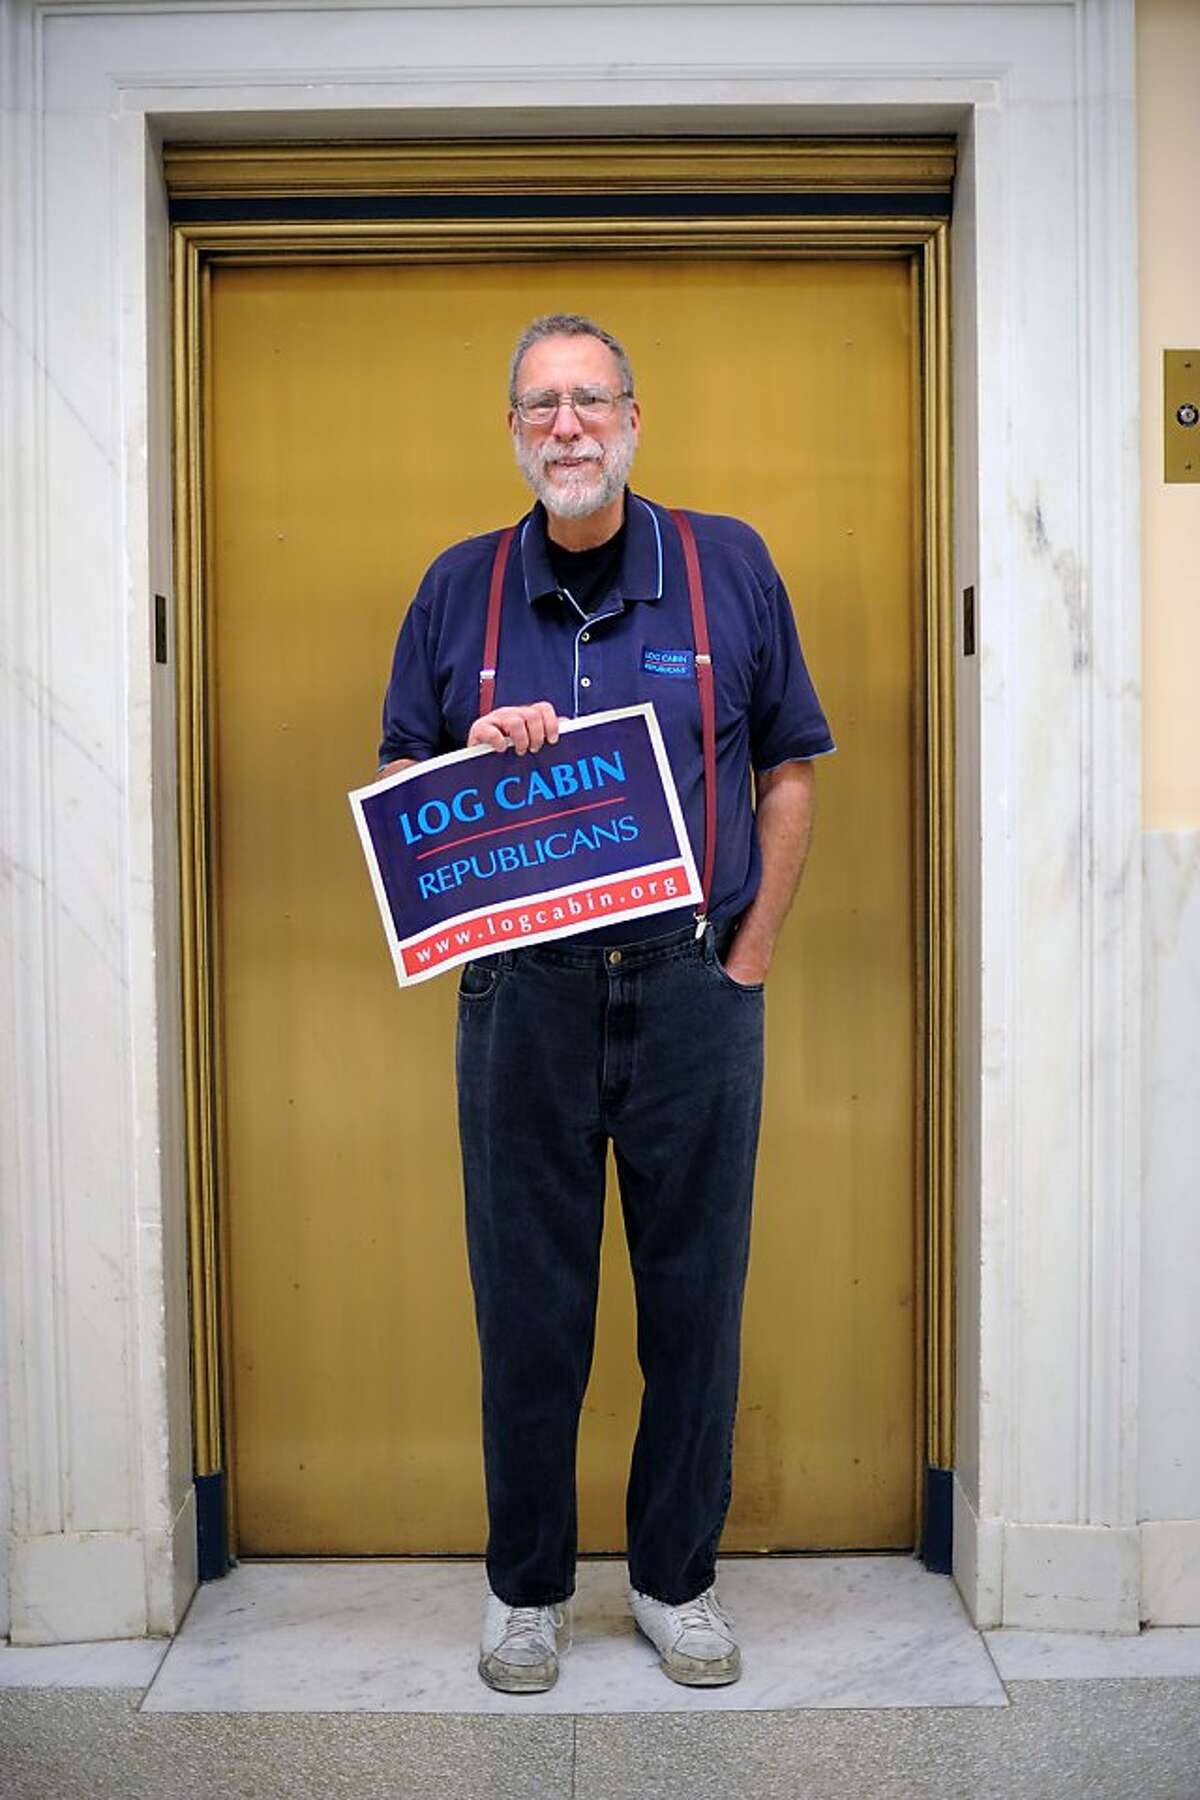 Christopher L. Bowman, a Log Cabin Republican, poses for a portrait outside the Department of Elections Room at City Hall in San Francisco, CA Friday March 8th, 2013.